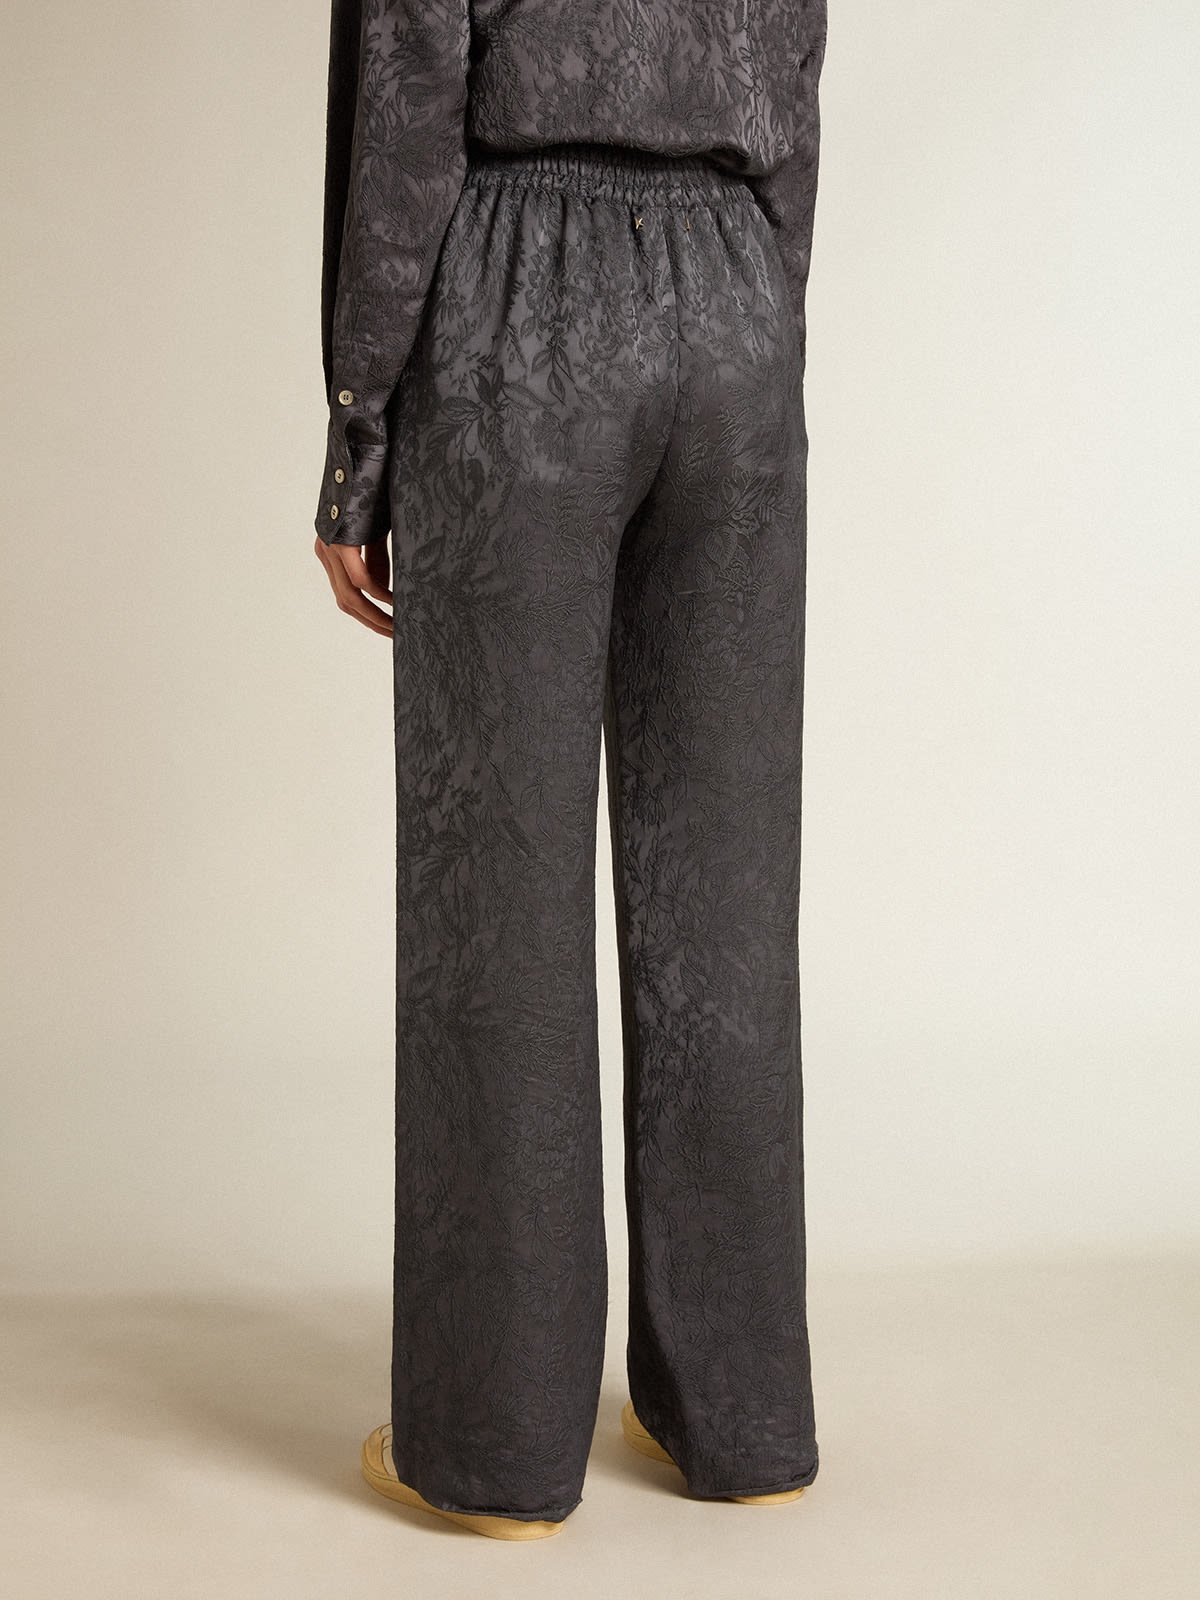 Jacquard pants with all-over toile de jouy pattern - 4